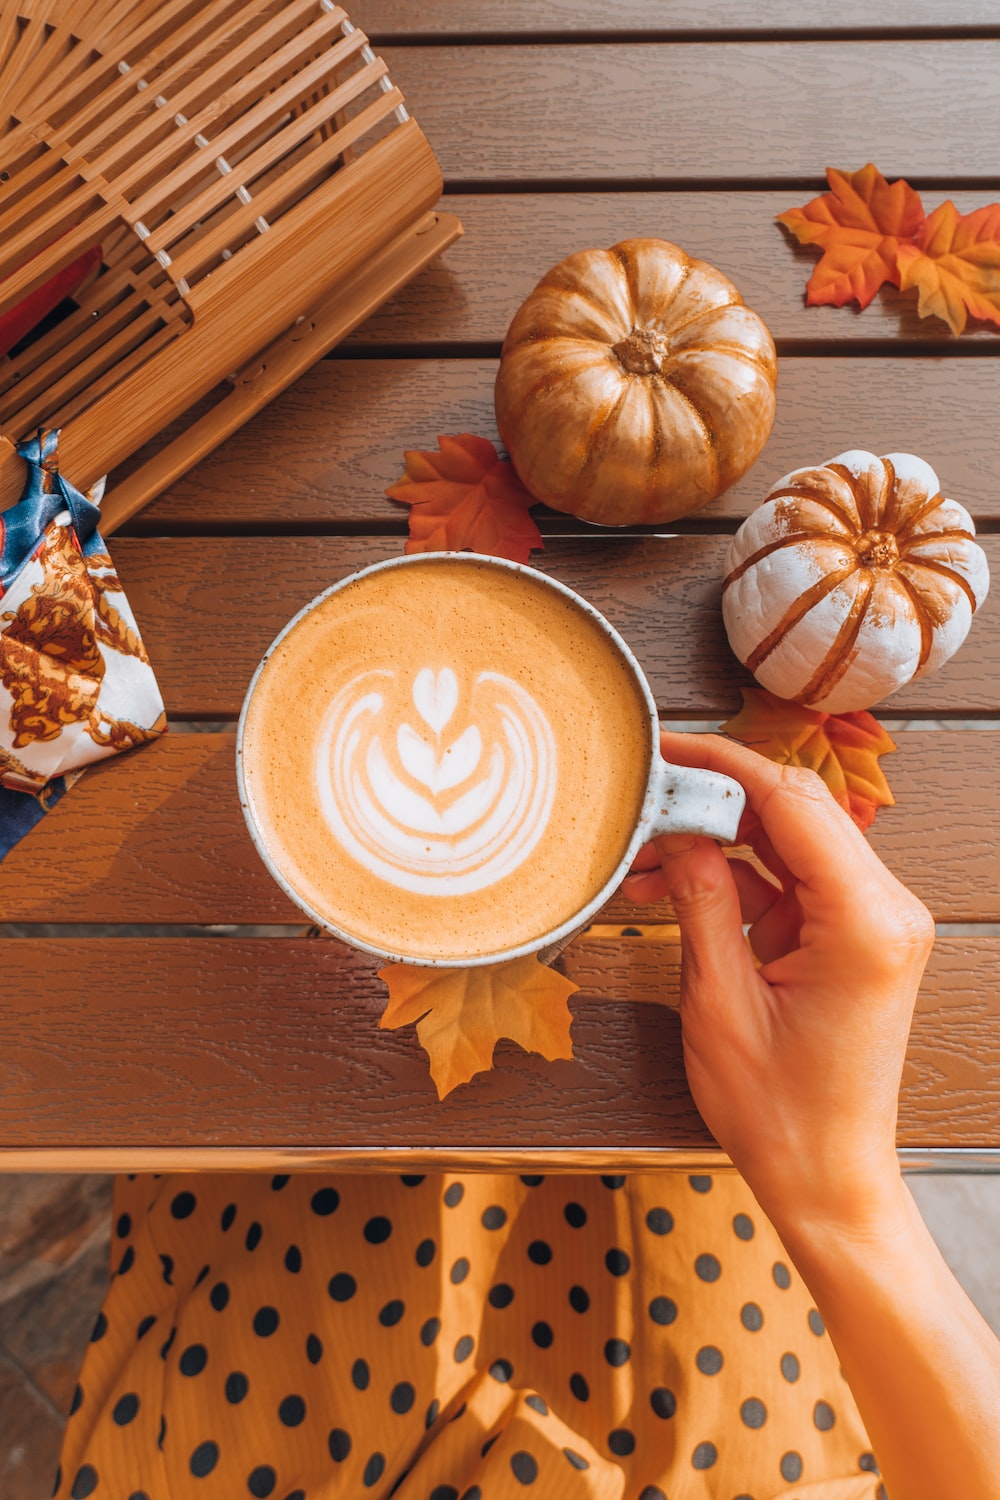 We Are NOT Ready For Pumpkin Spice Season!